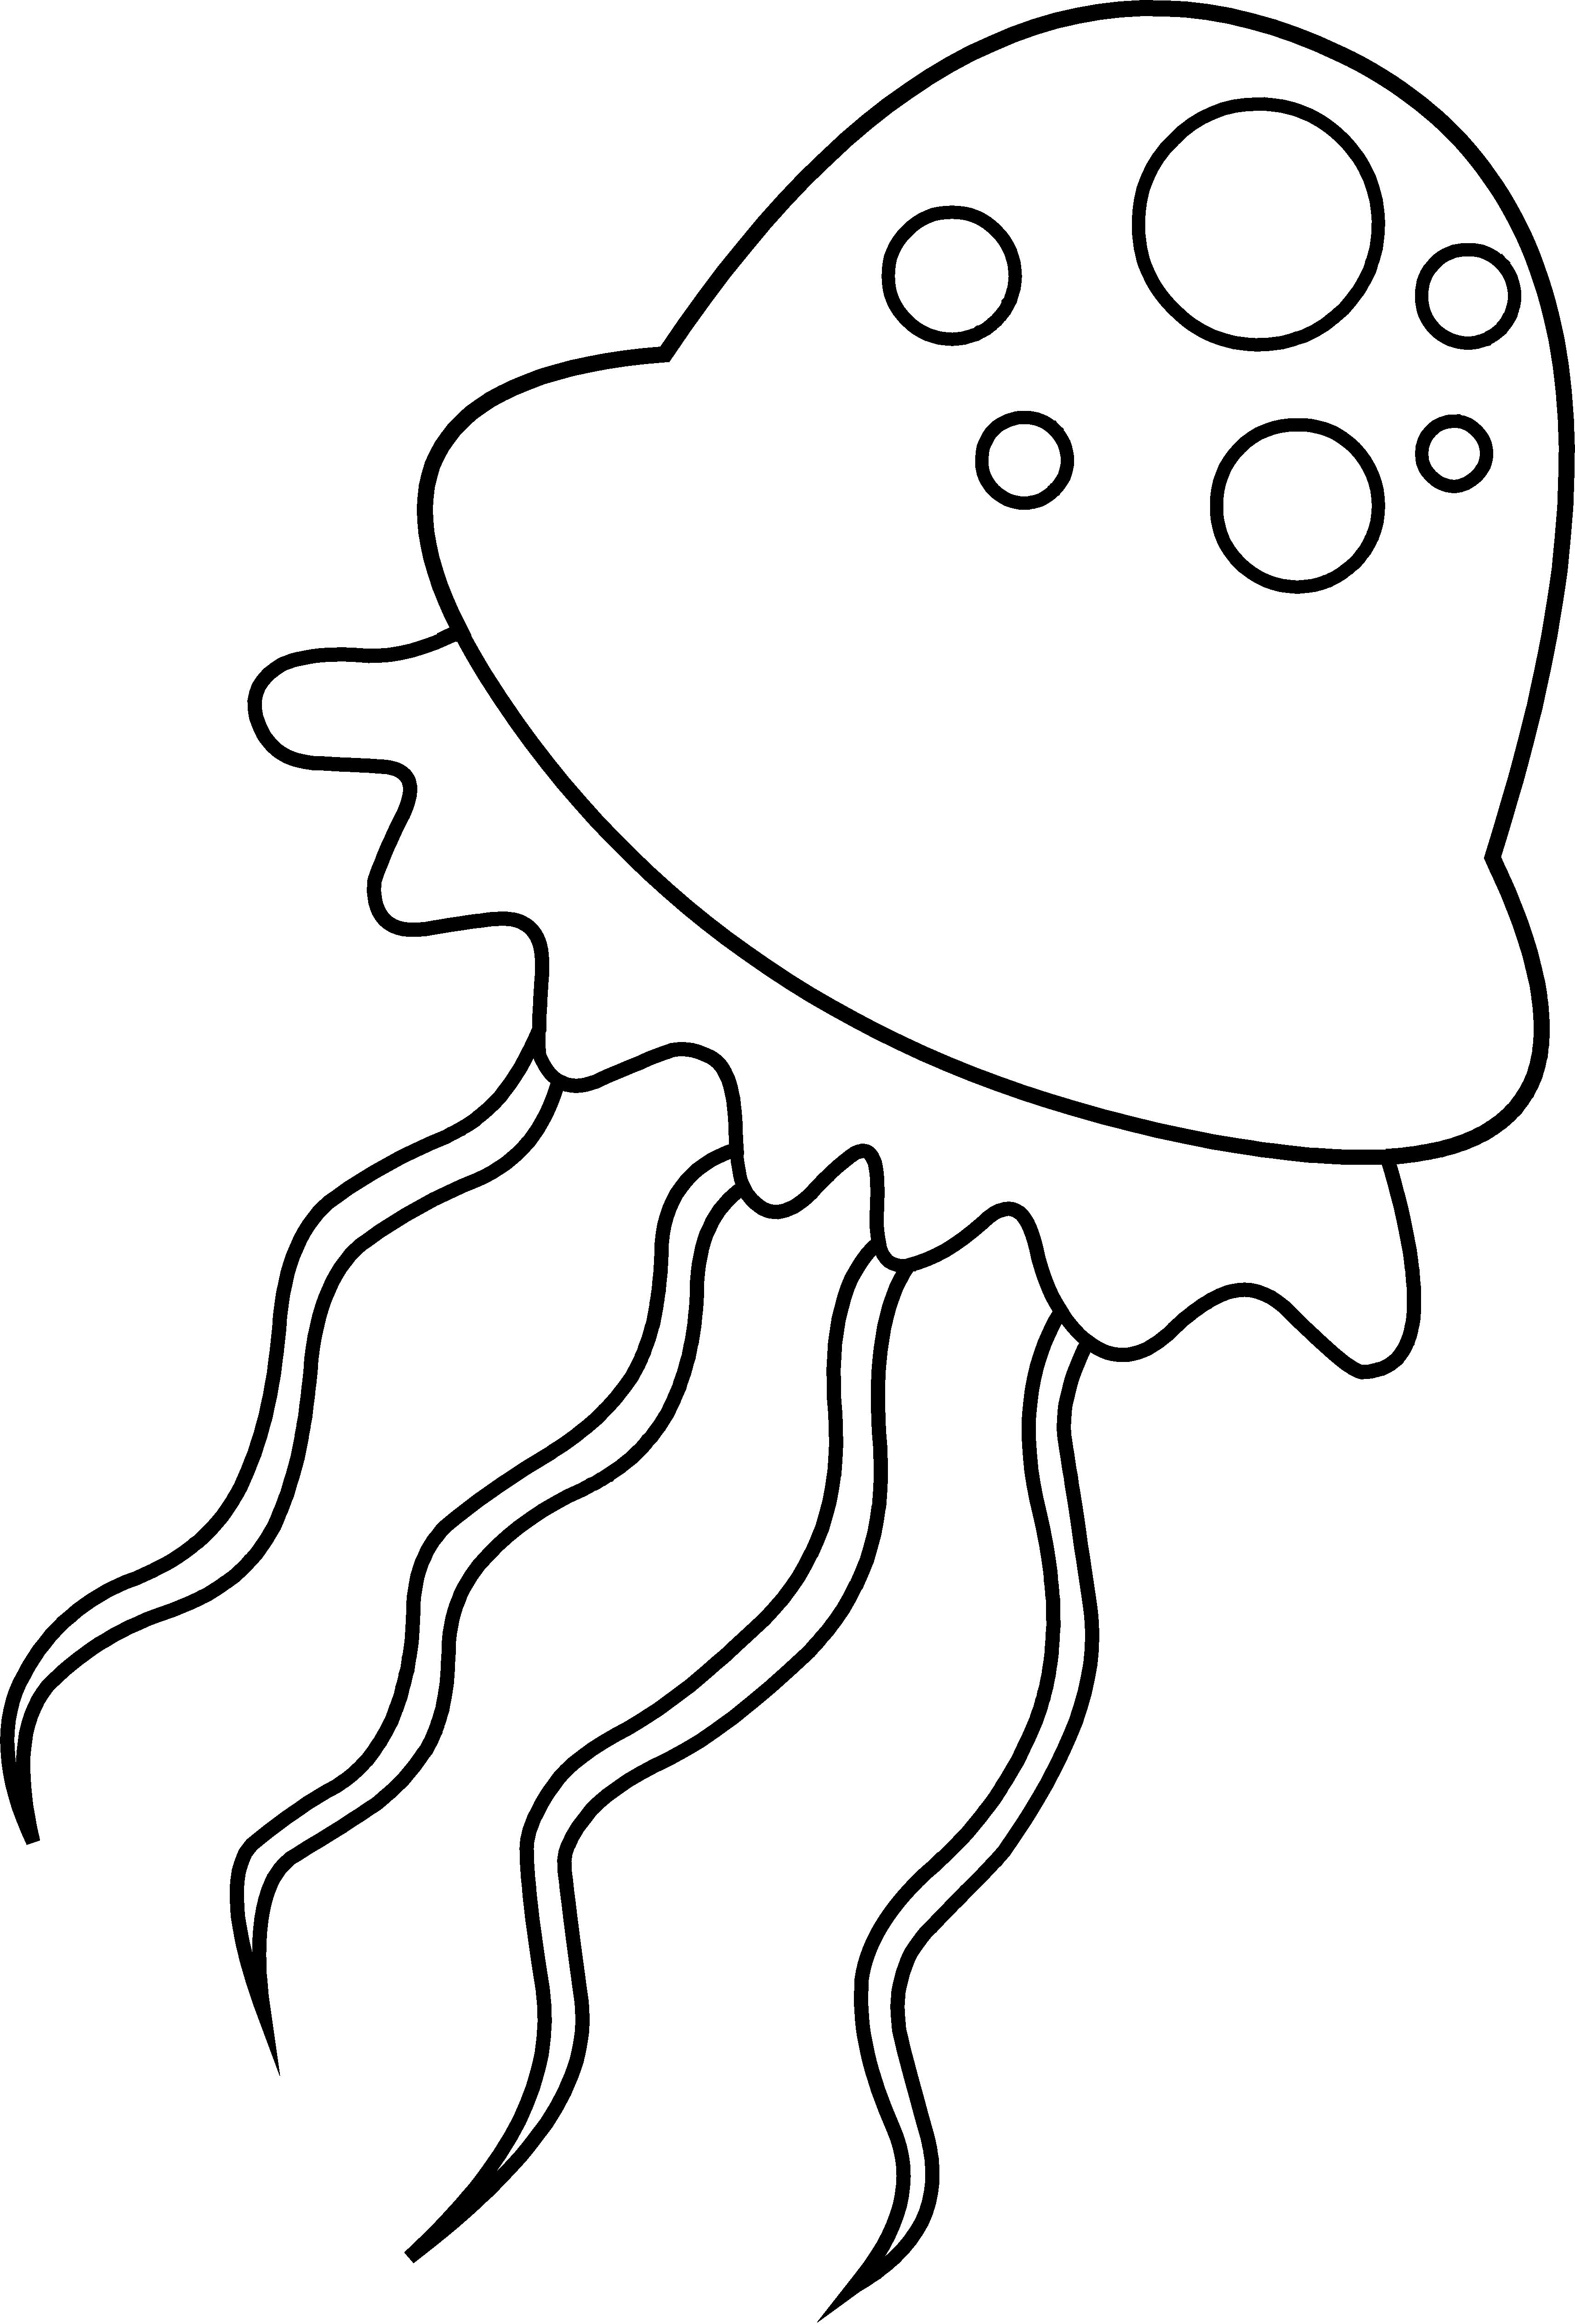 Free Jellyfish Outline, Download Free Jellyfish Outline